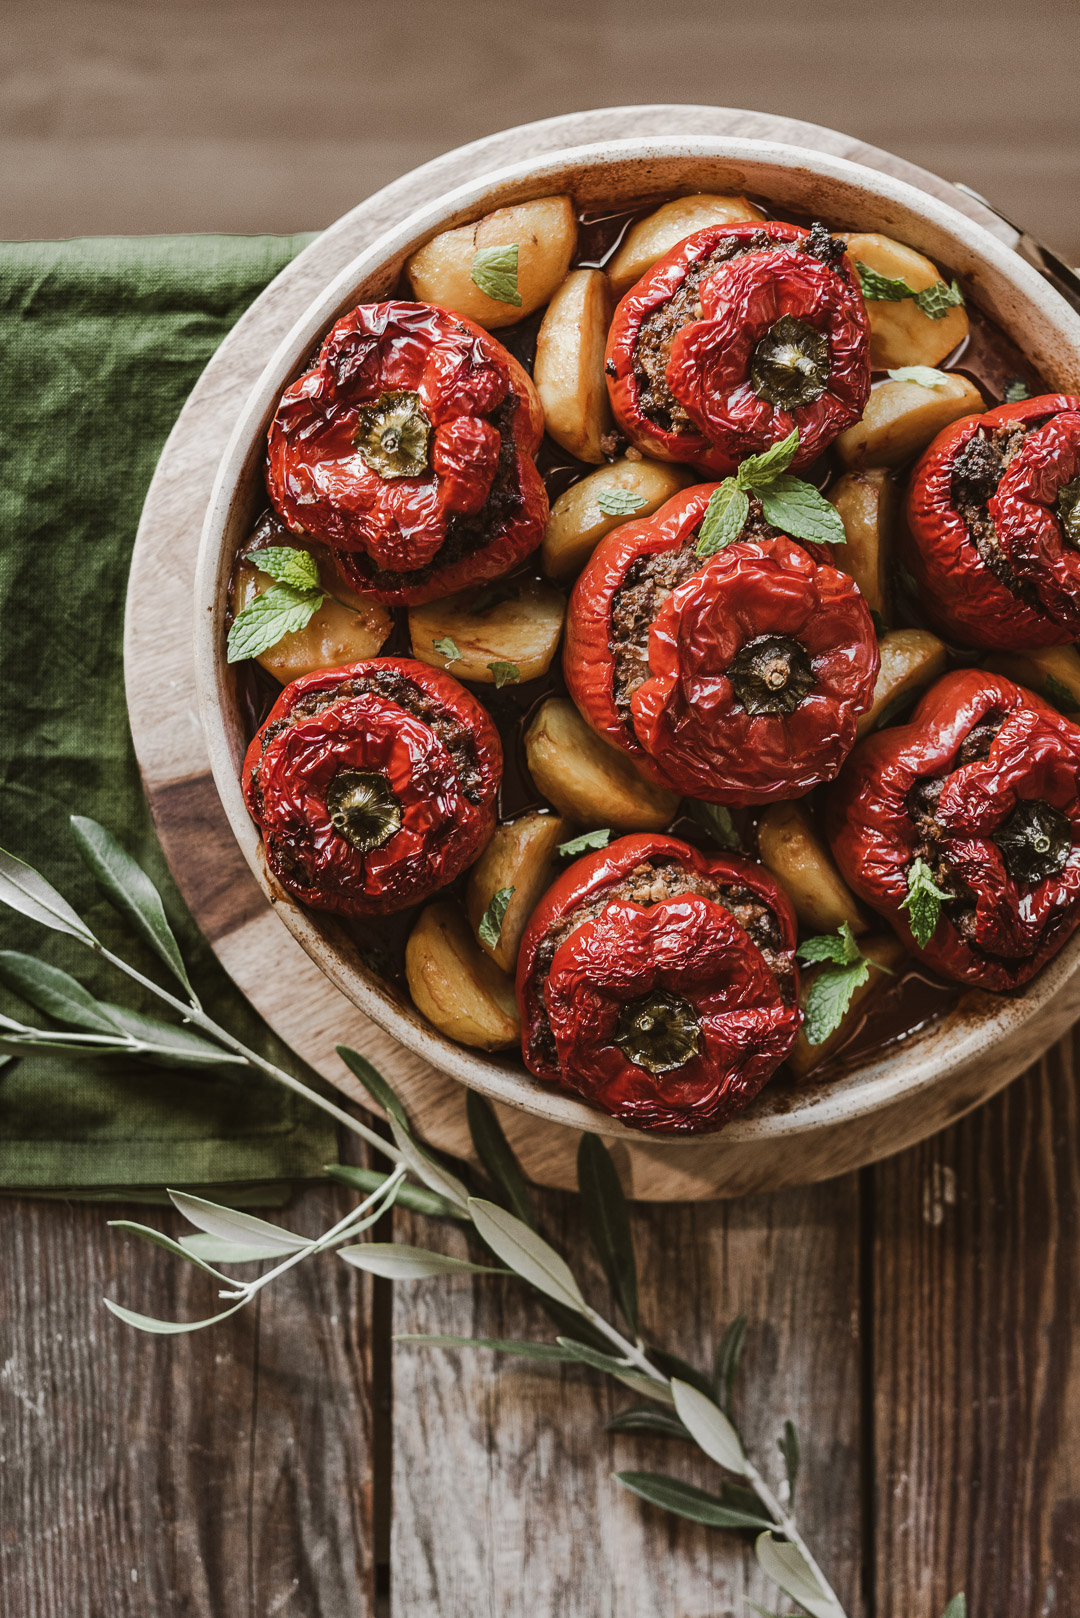 A unique take on tradtional Greek Gemistá, these Cauliflower Rice Stuffed Peppers are an absolutely delicious way to enjoy this classic dish.